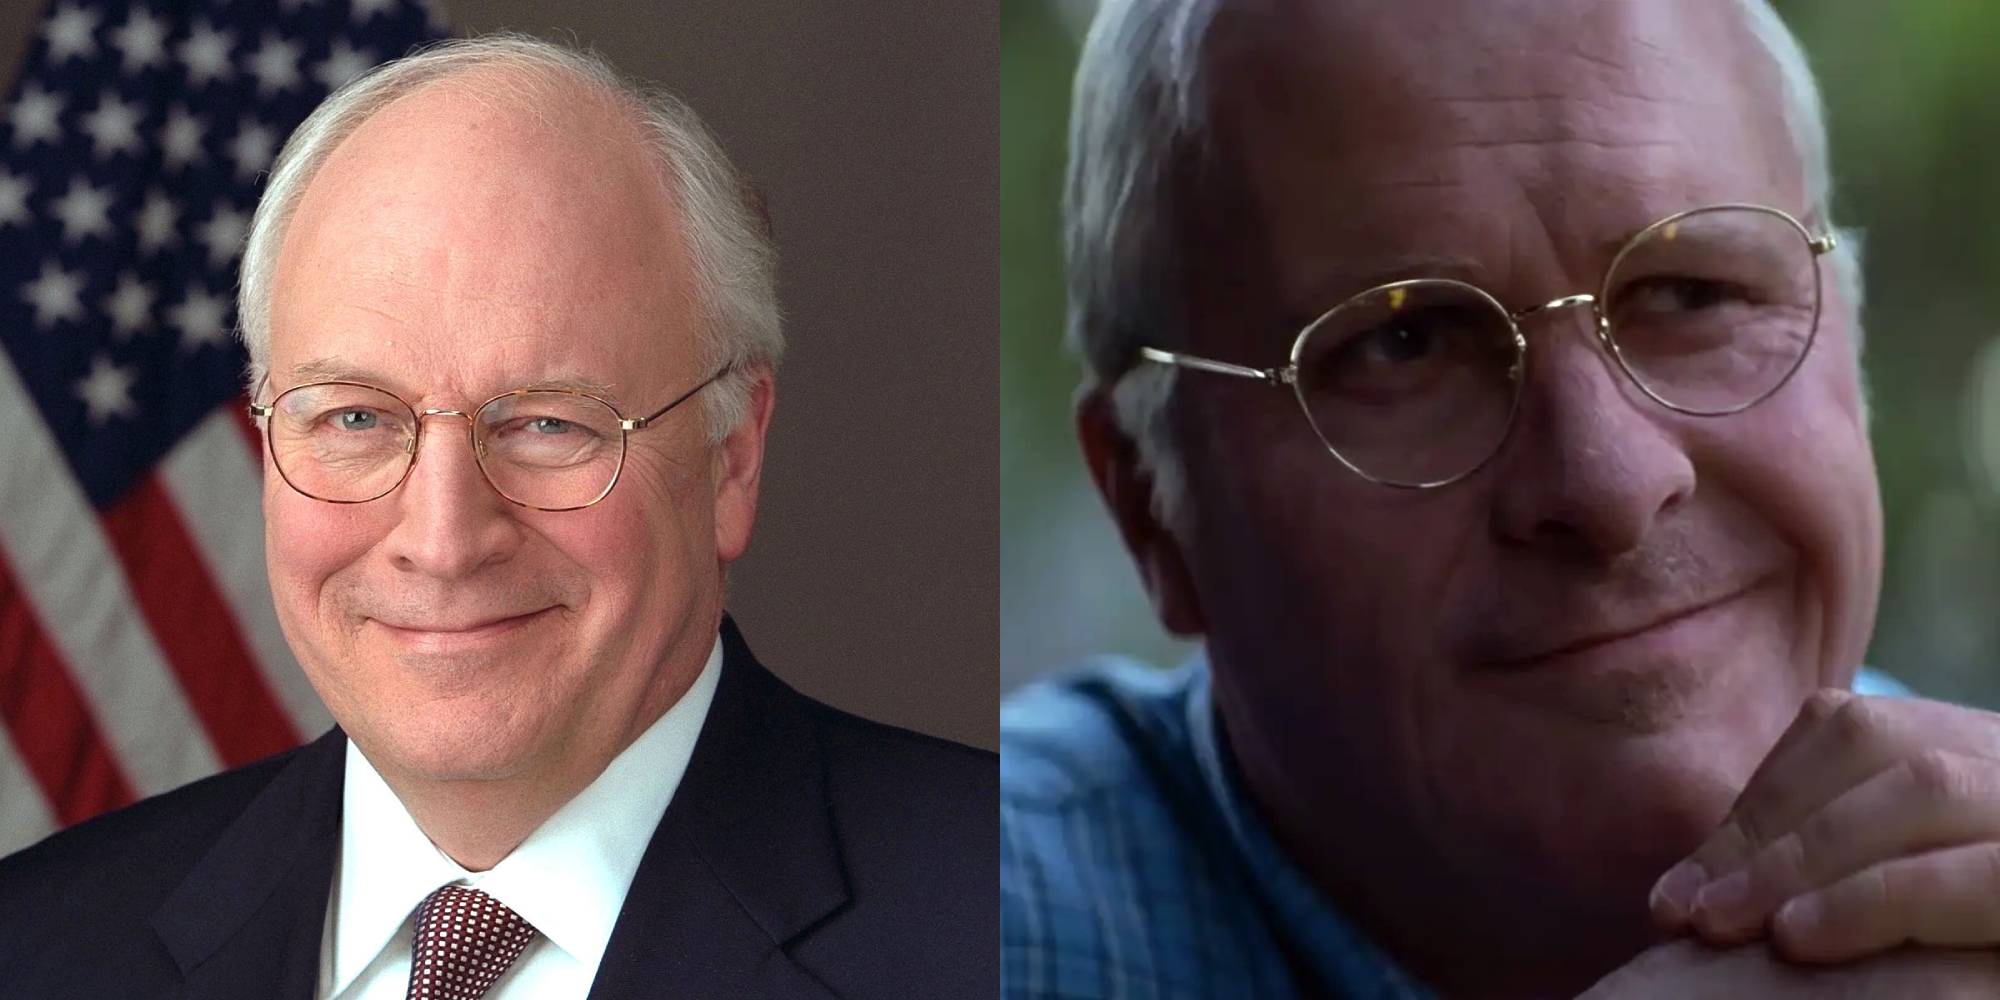 Who played dick cheney in the movie vice